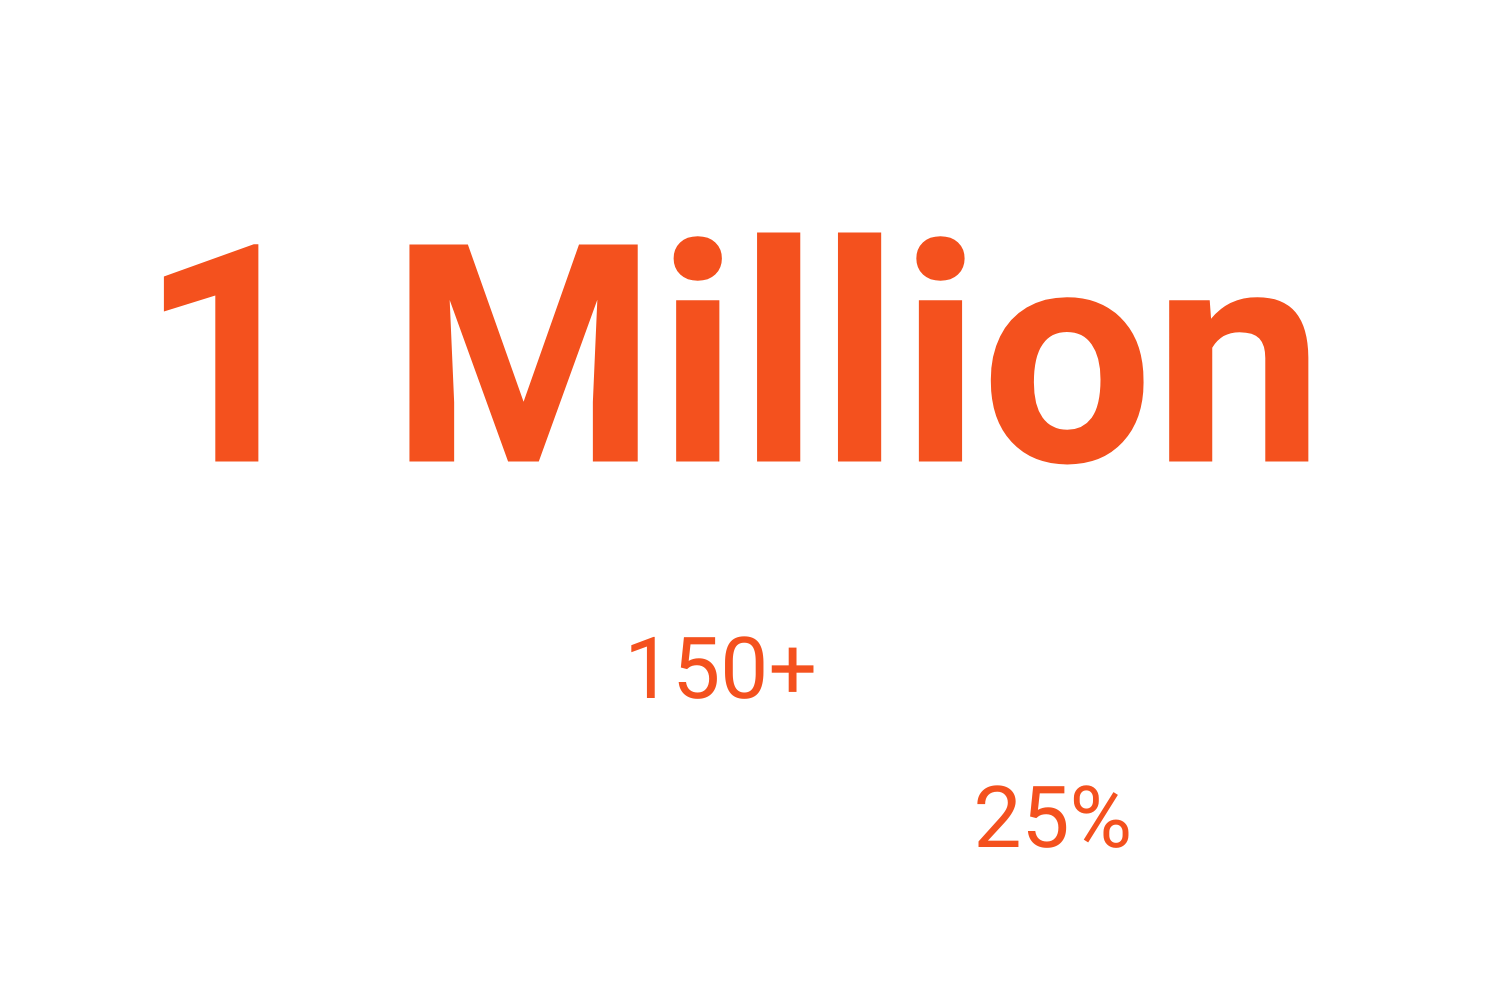 For the first time, we have 1 Million Medics duties rostered per month from across 150+ organisations This is an increase of 25% since November 2022!